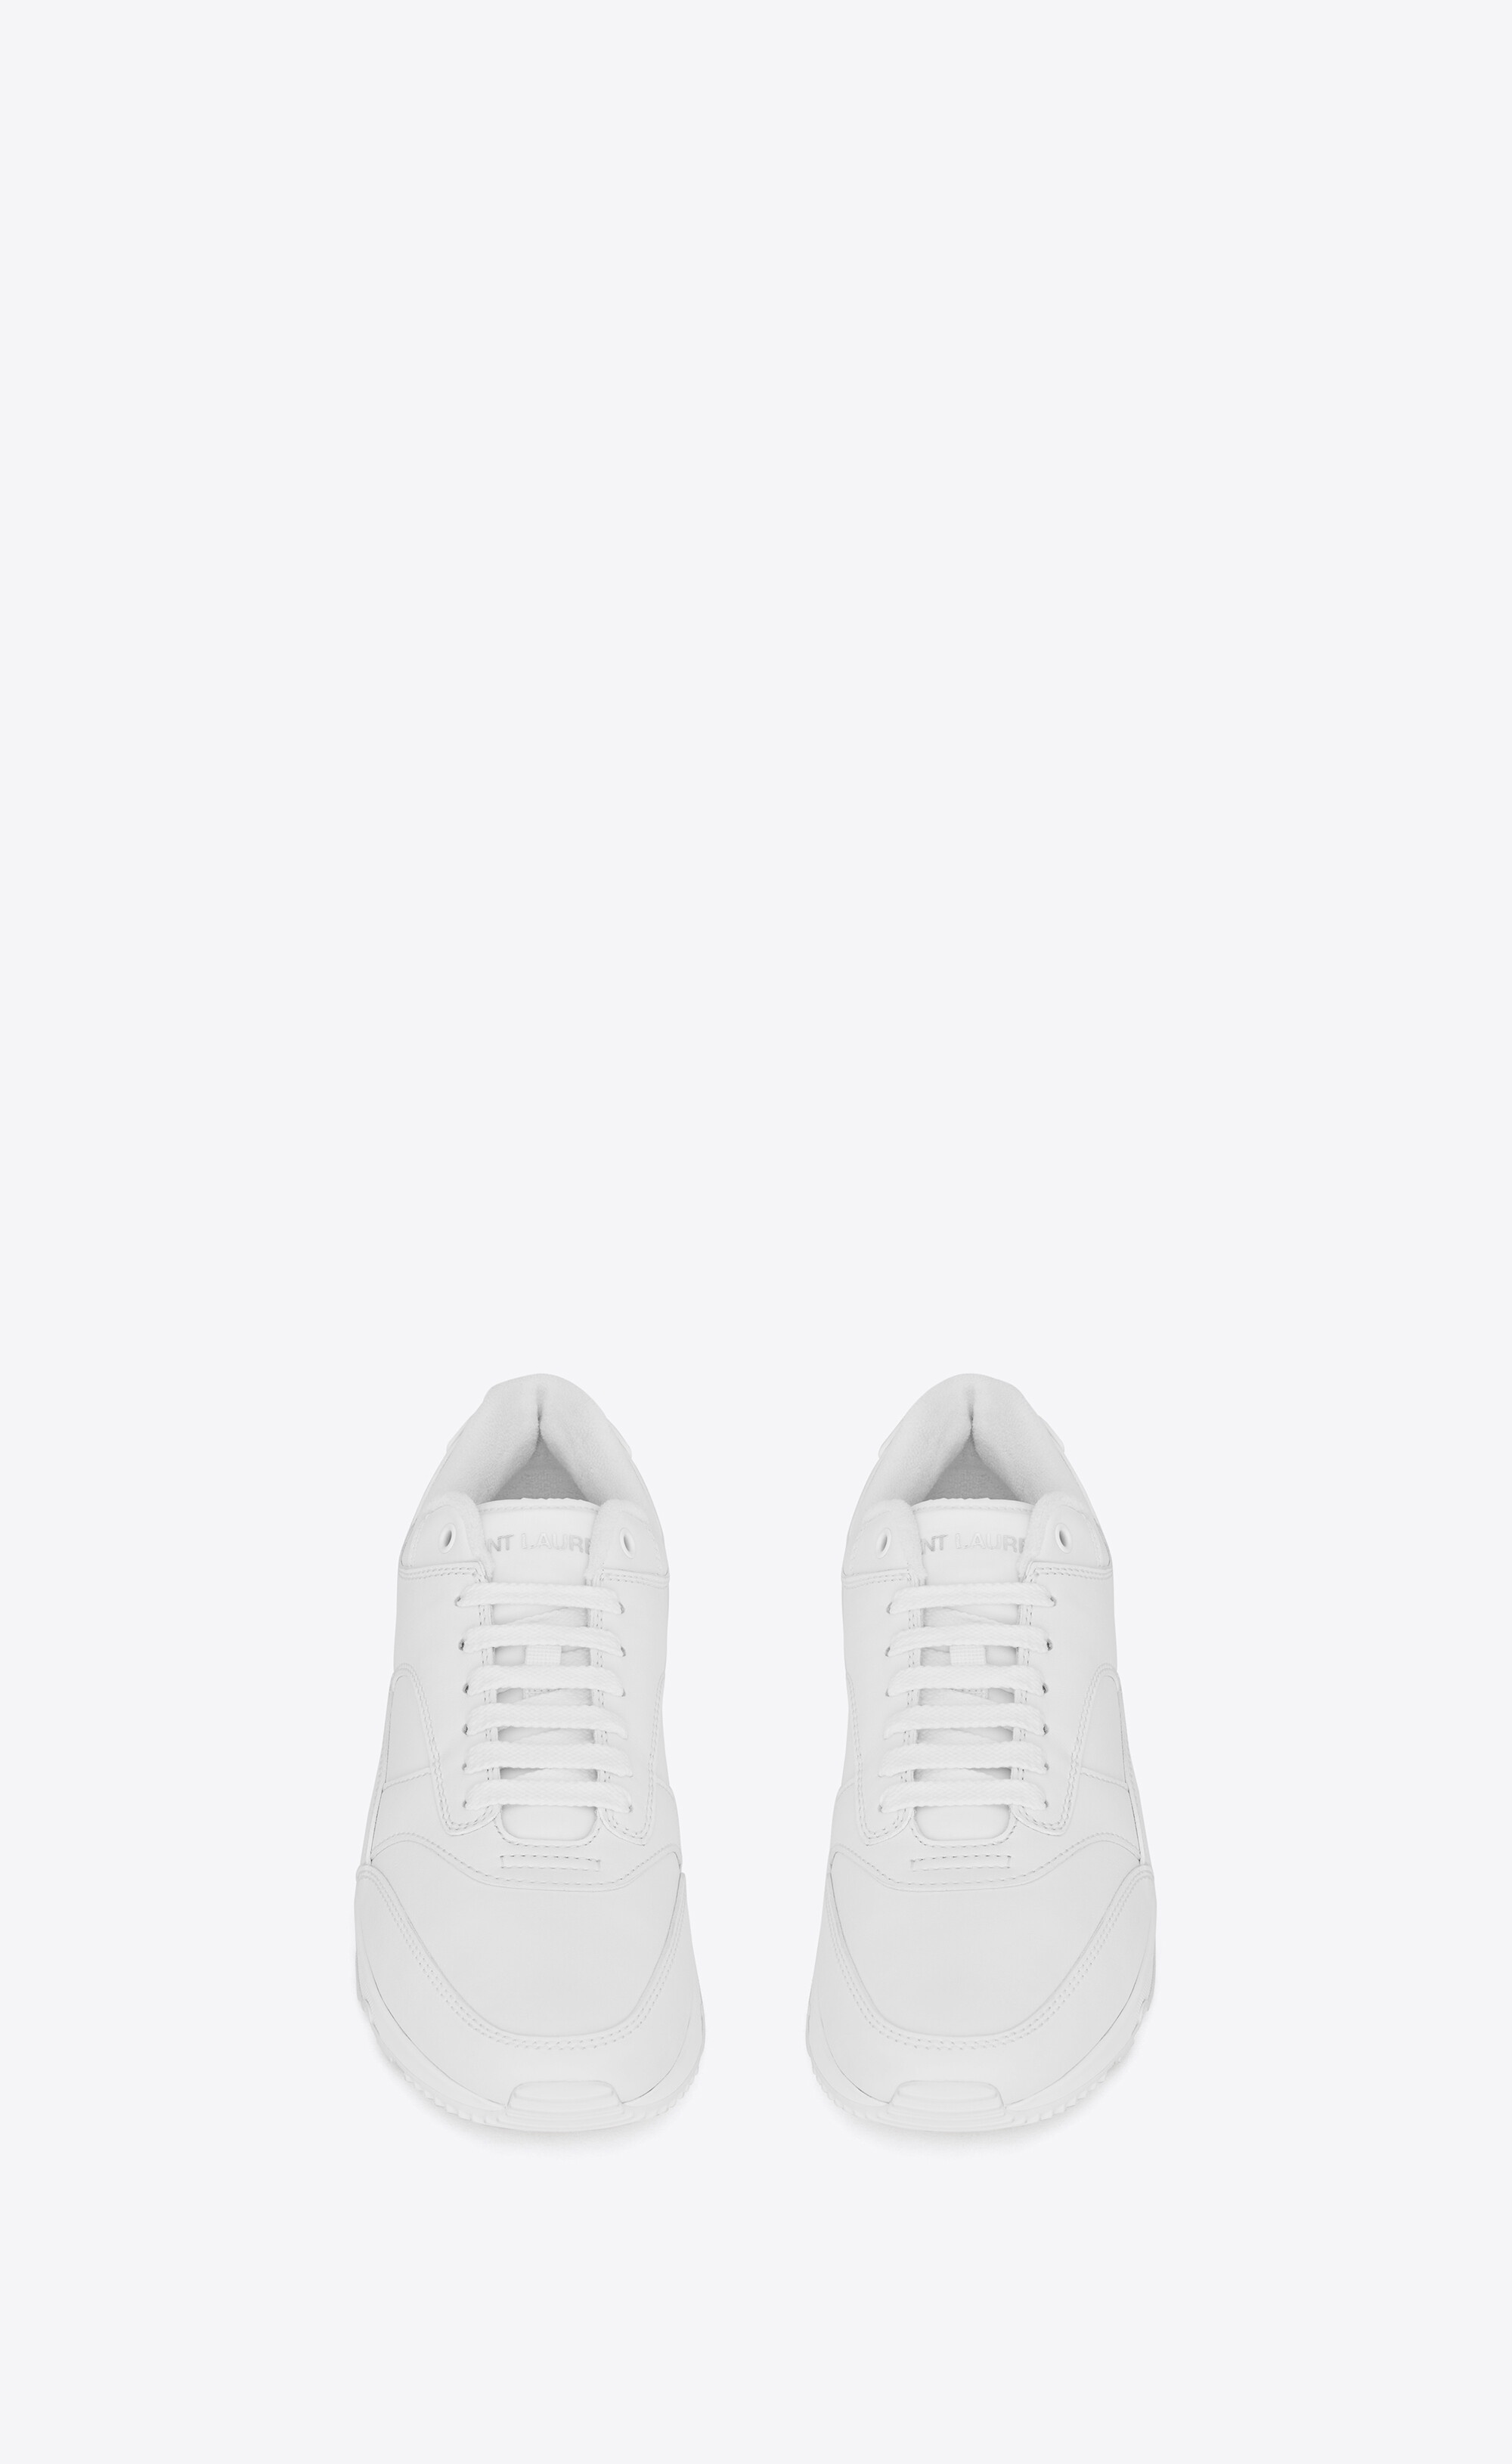 bump sneakers in smooth leather - 2